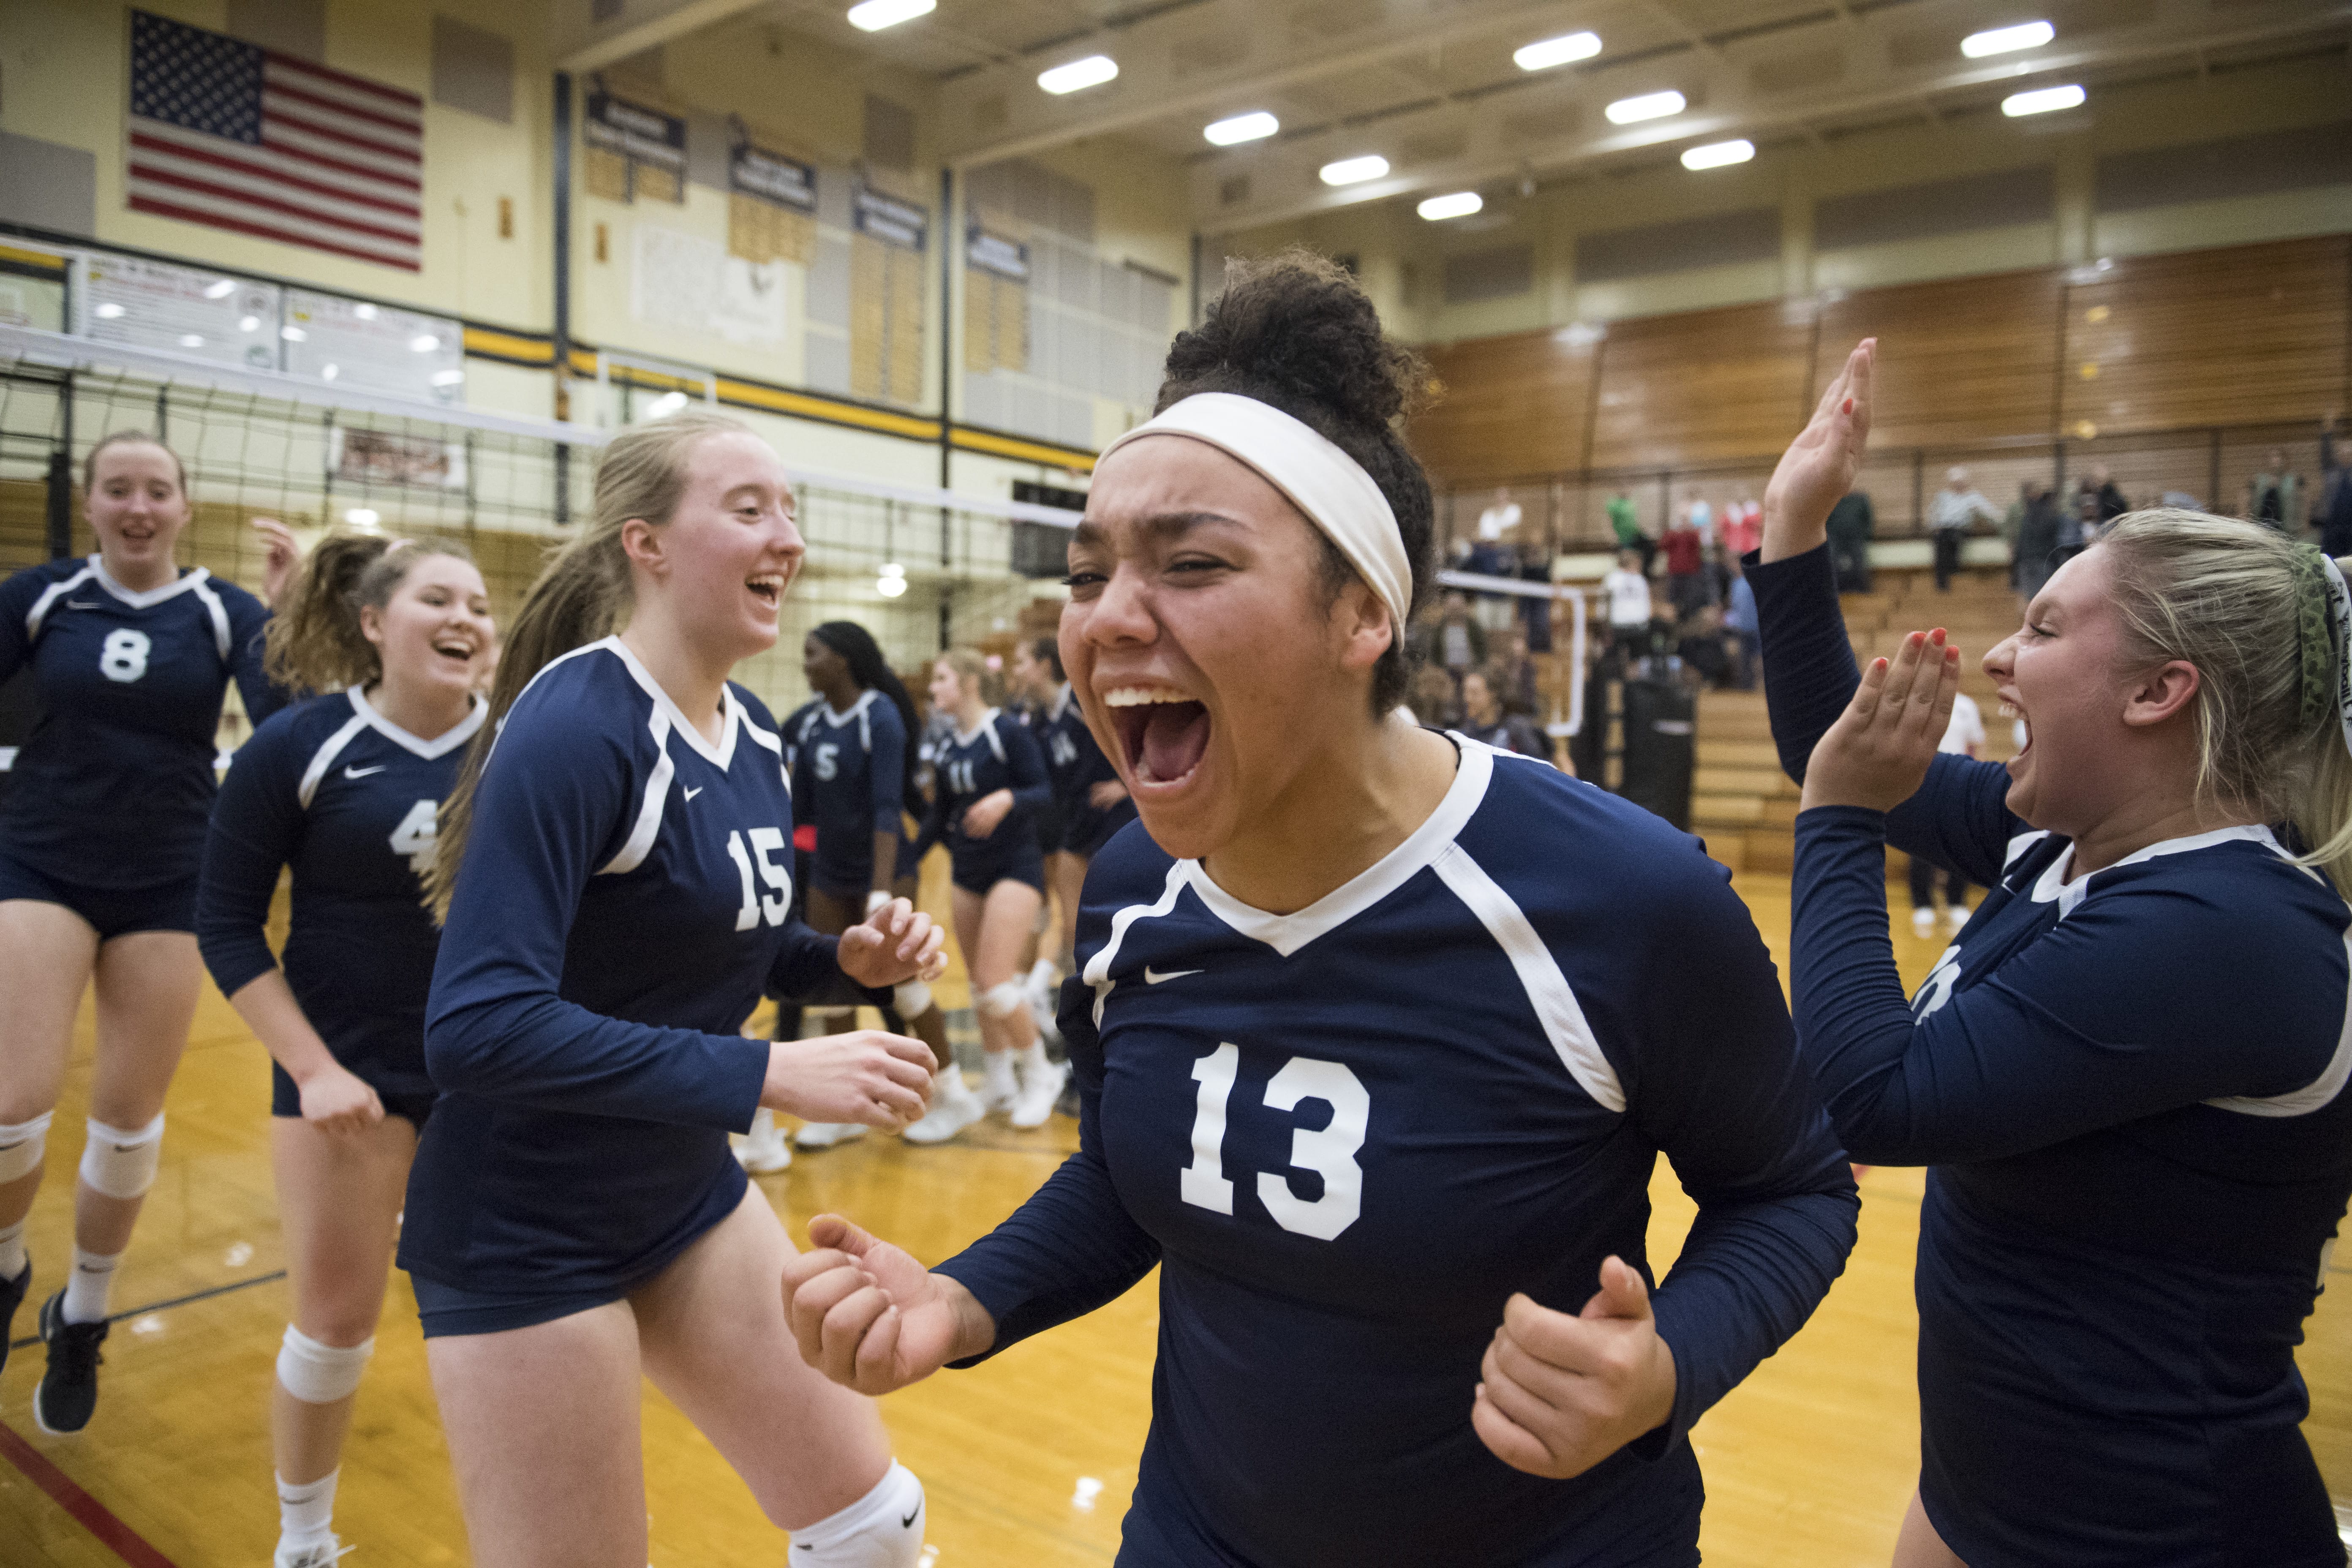 Skyview's Tyra Schaub (center right) celebrates with her team following a victory over Camas at Hudson's Bay High School on Tuesday night, Oct. 30, 2018.